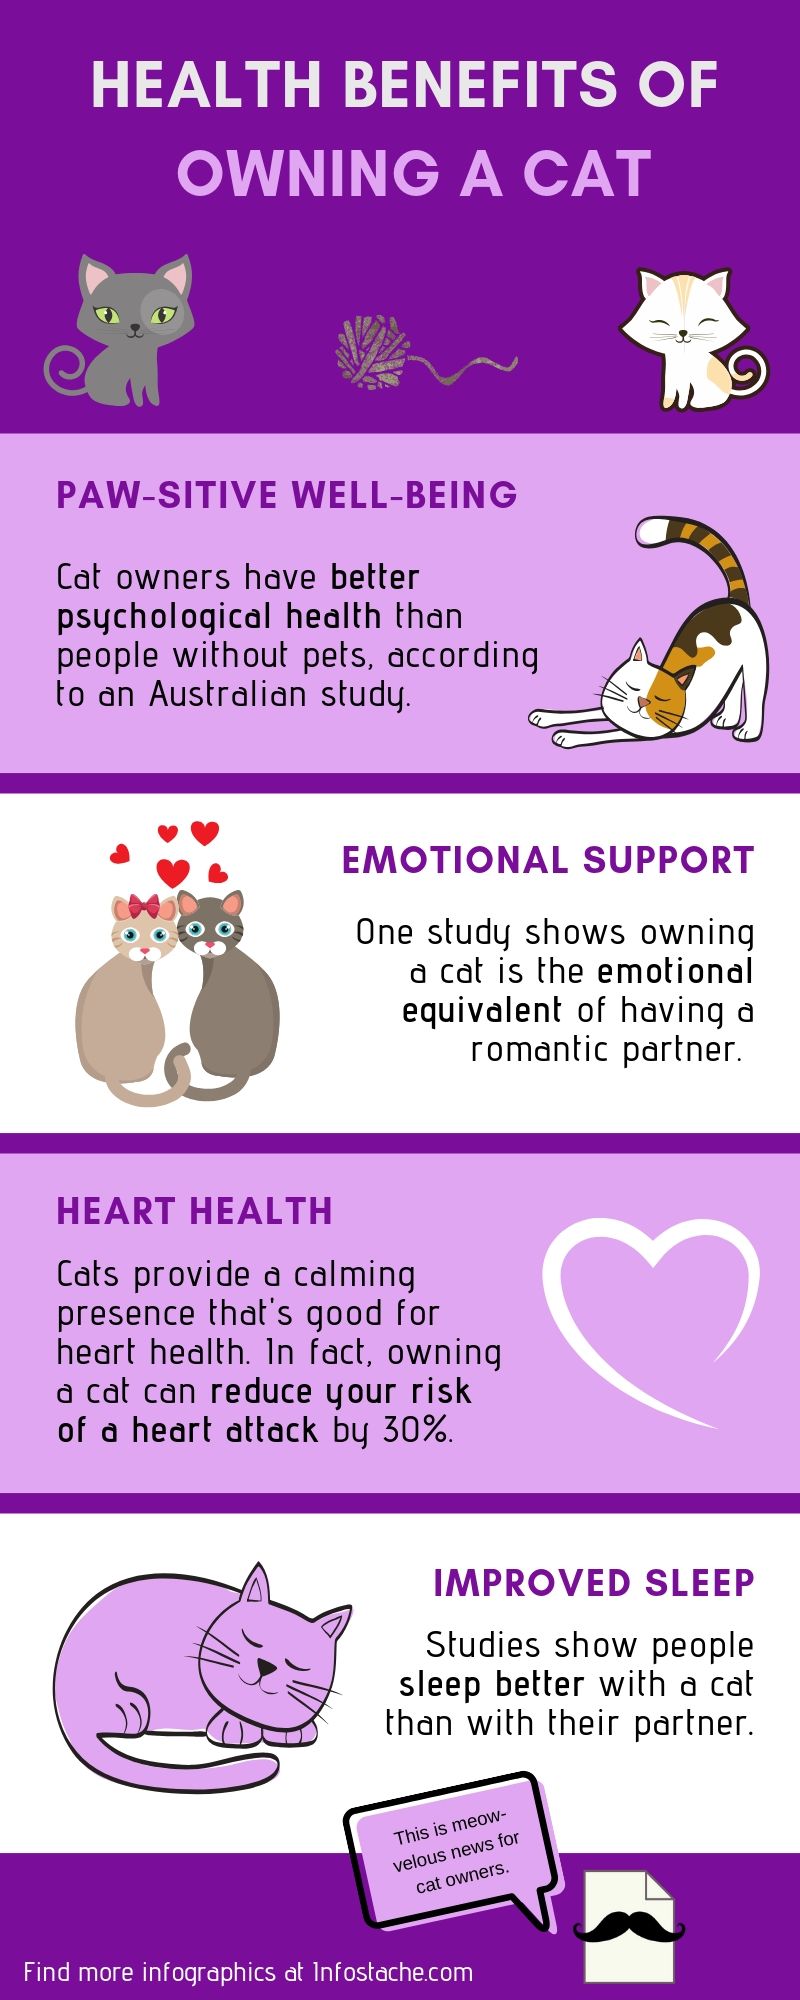 Health Benefits of Owning a Cat - Infographic